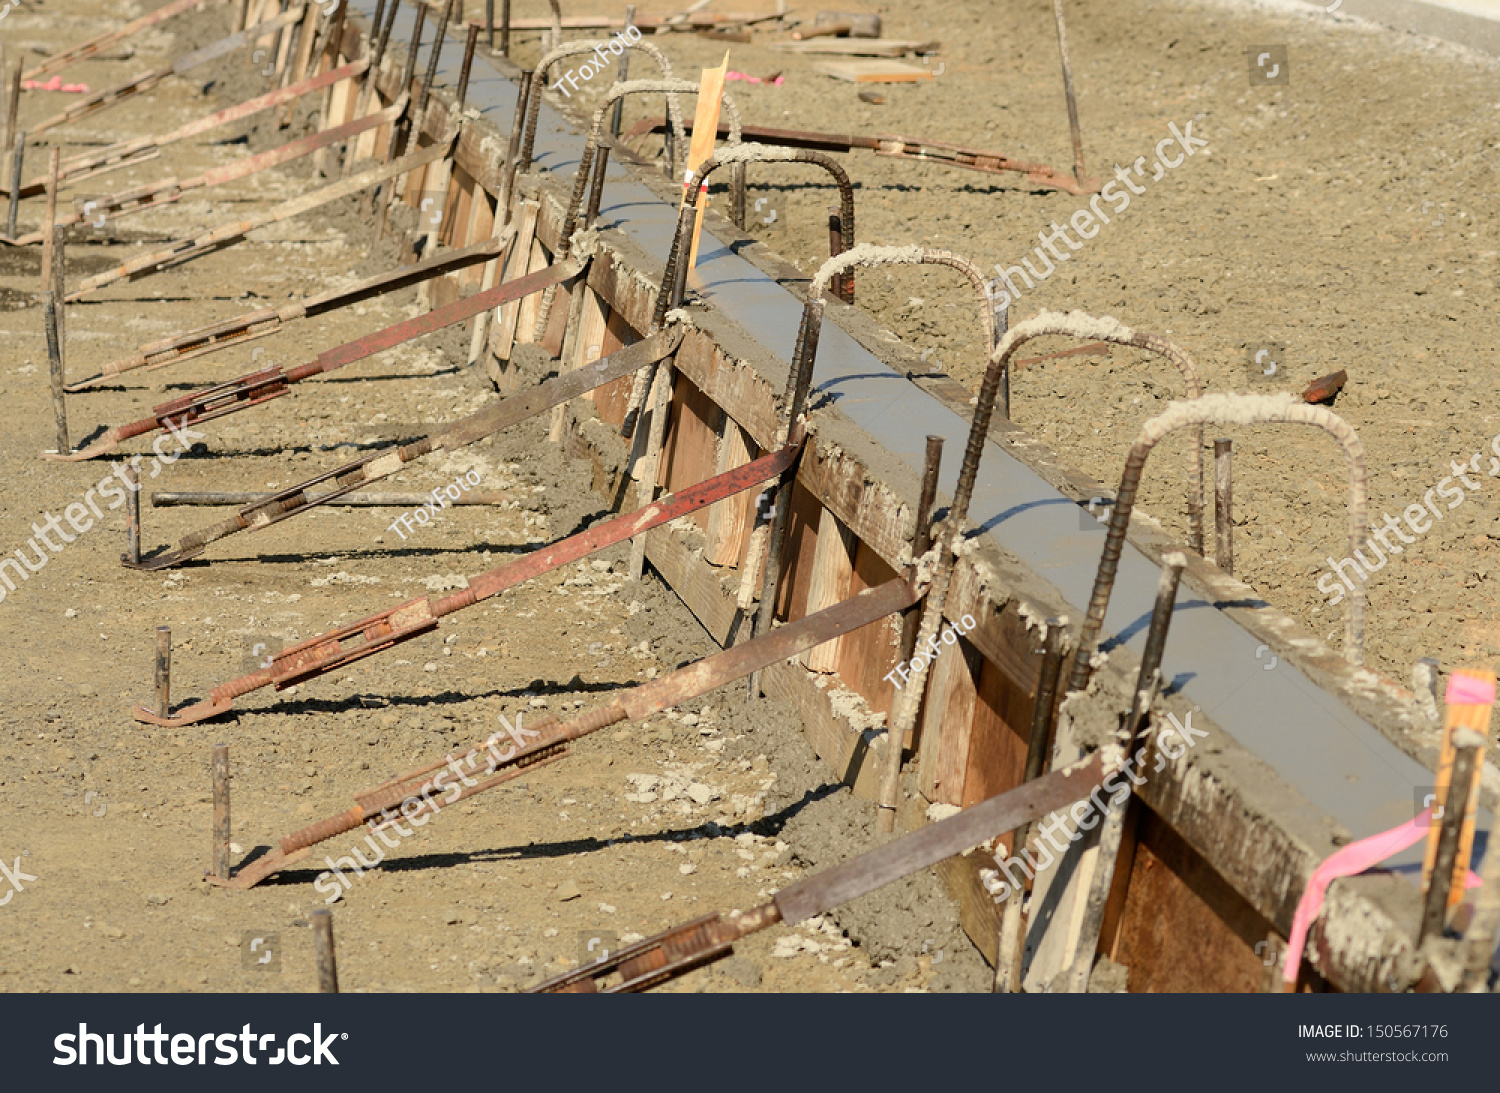 concrete-formwork-with-wood-forms-with-supports-braces-and-steel